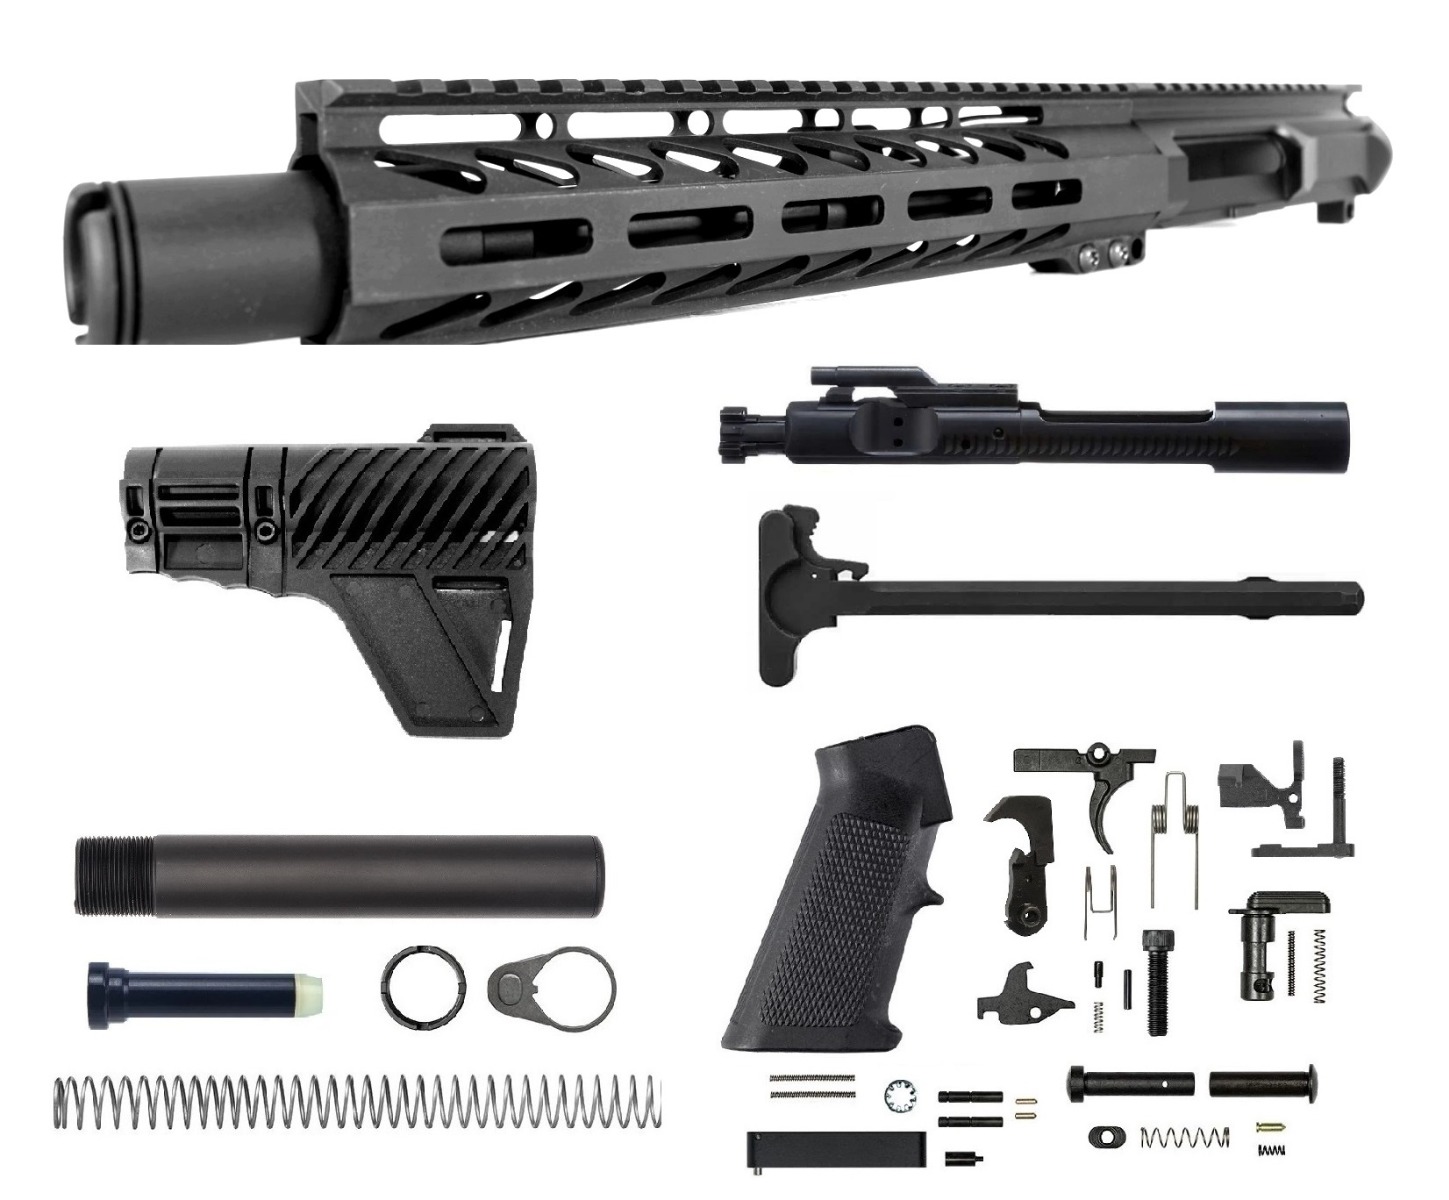 8.5 inch 300 Blackout Left Handed AR-15 Upper Kit w/Can | Pro2a Tactical